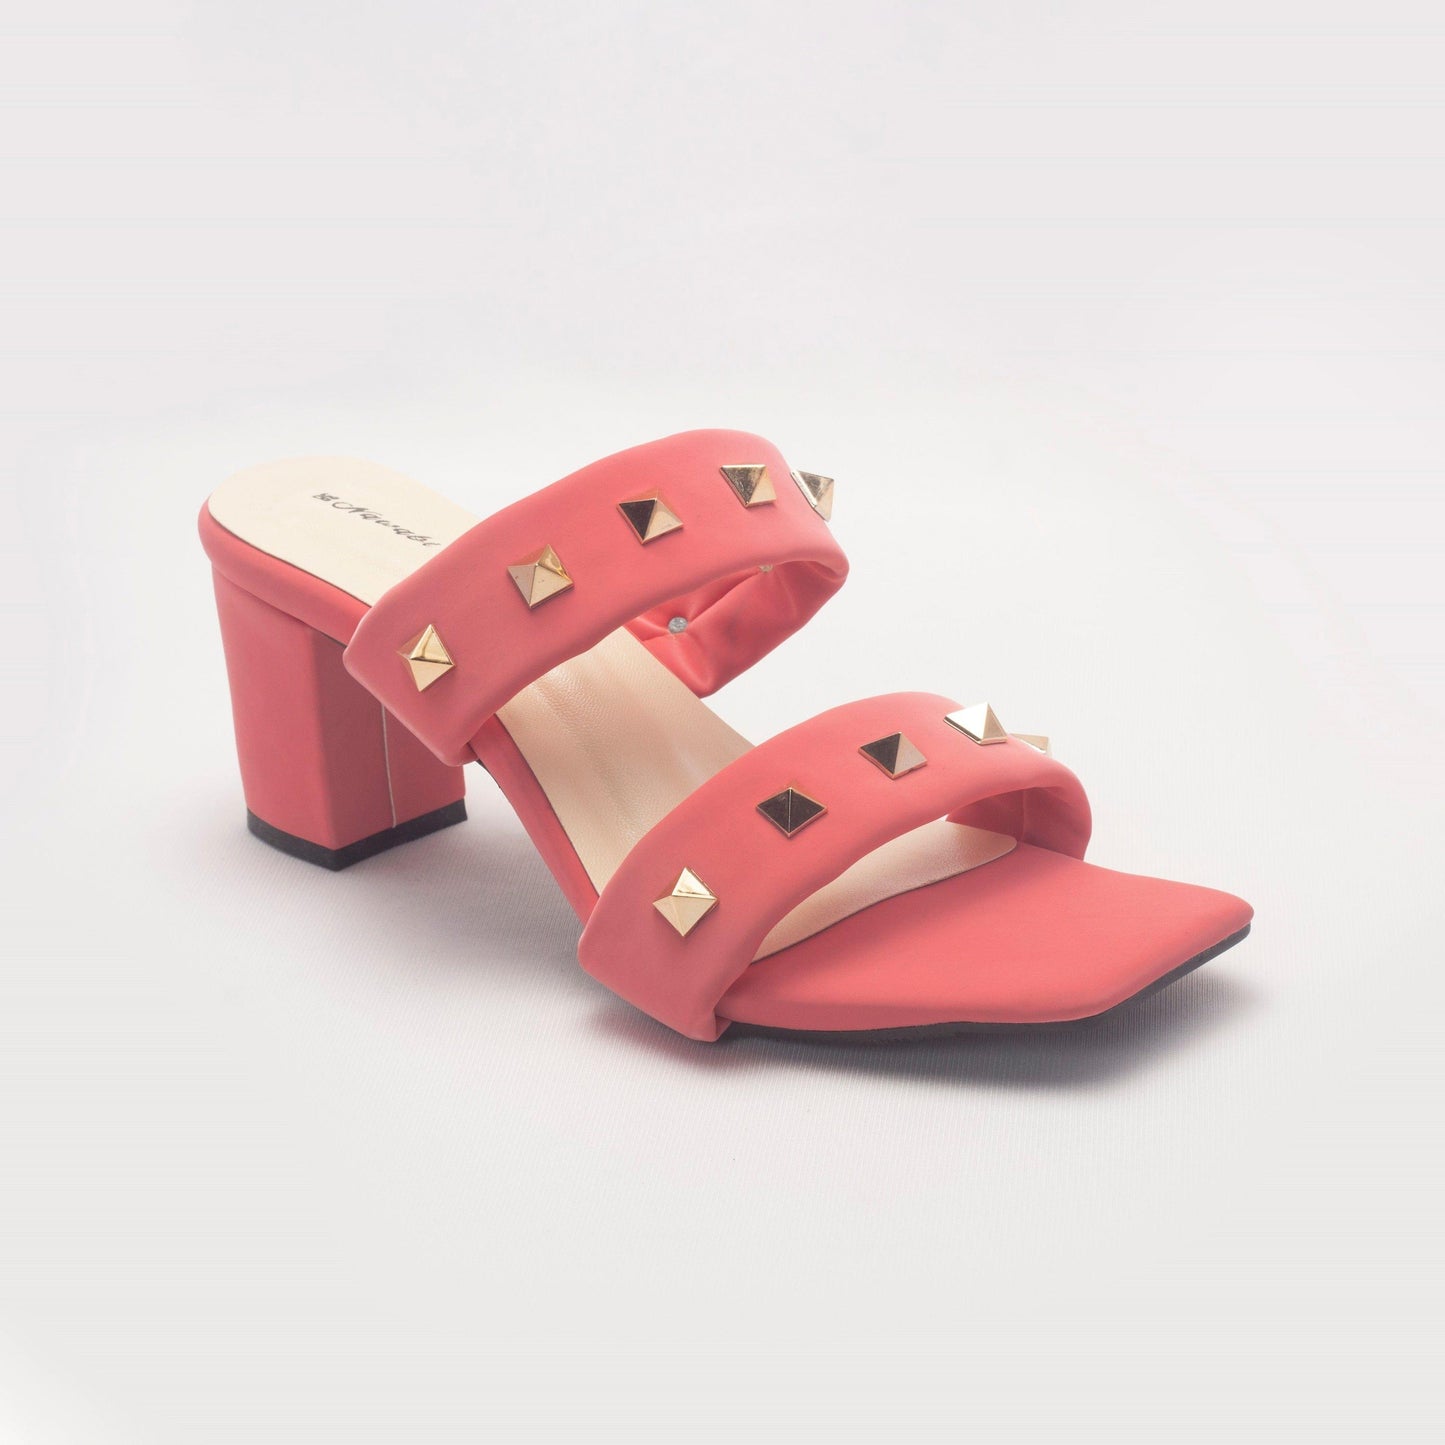 Nawabi Shoes BD Shoes Stylish and Versatile: Block Heels for Any Occasion